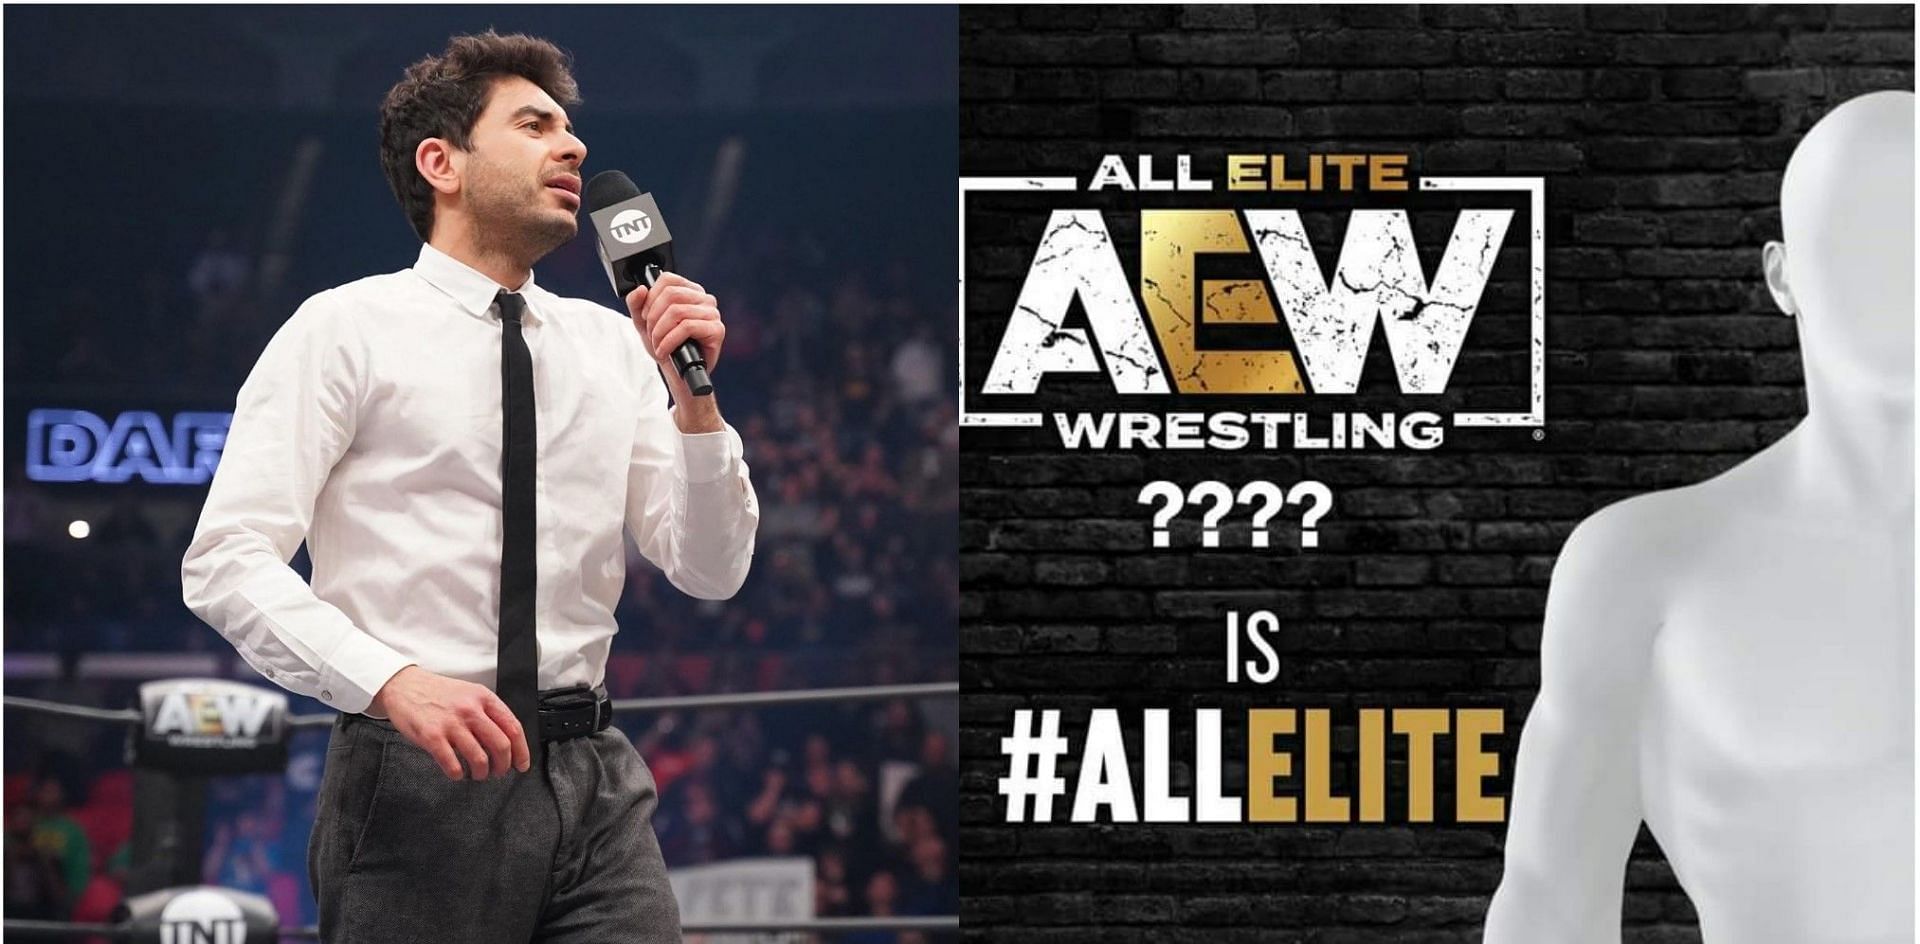 Tony Khan is the owner of both AEW and ROH!